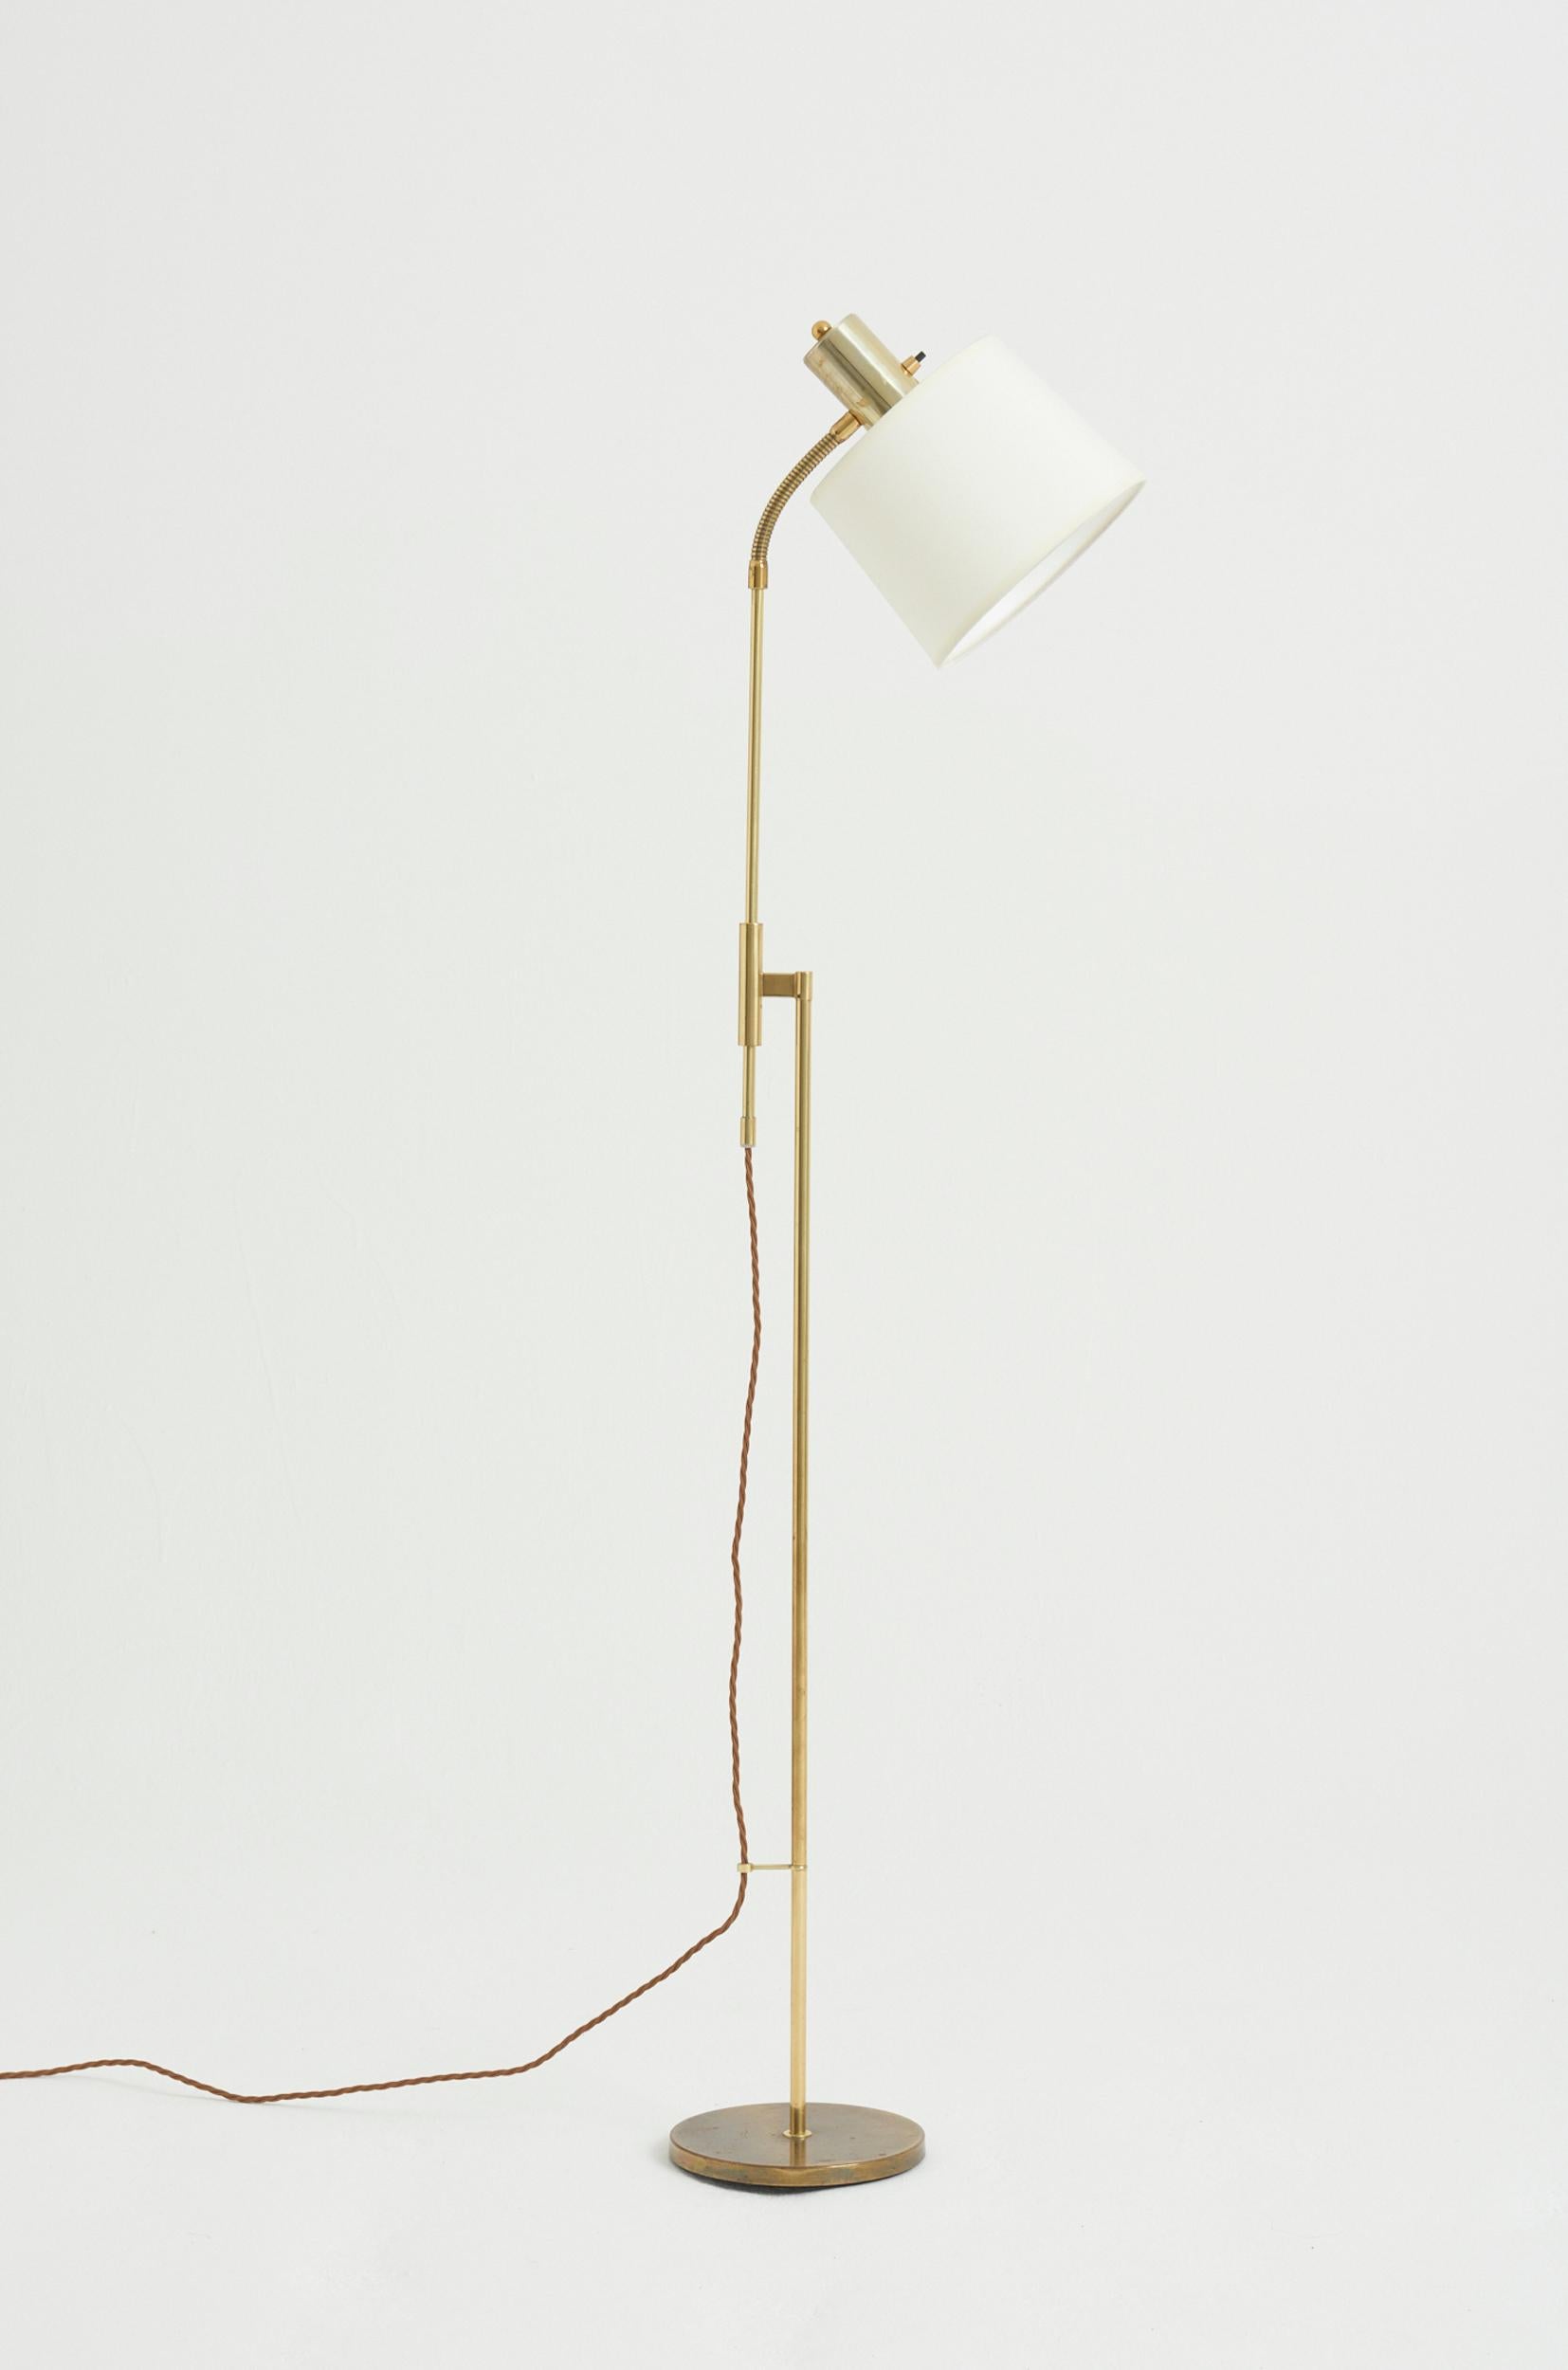 A brass telescopic reading floor lamp
Sweden, mid 20th Century
137 cm high by 20.5 cm wide by 42 cm depth